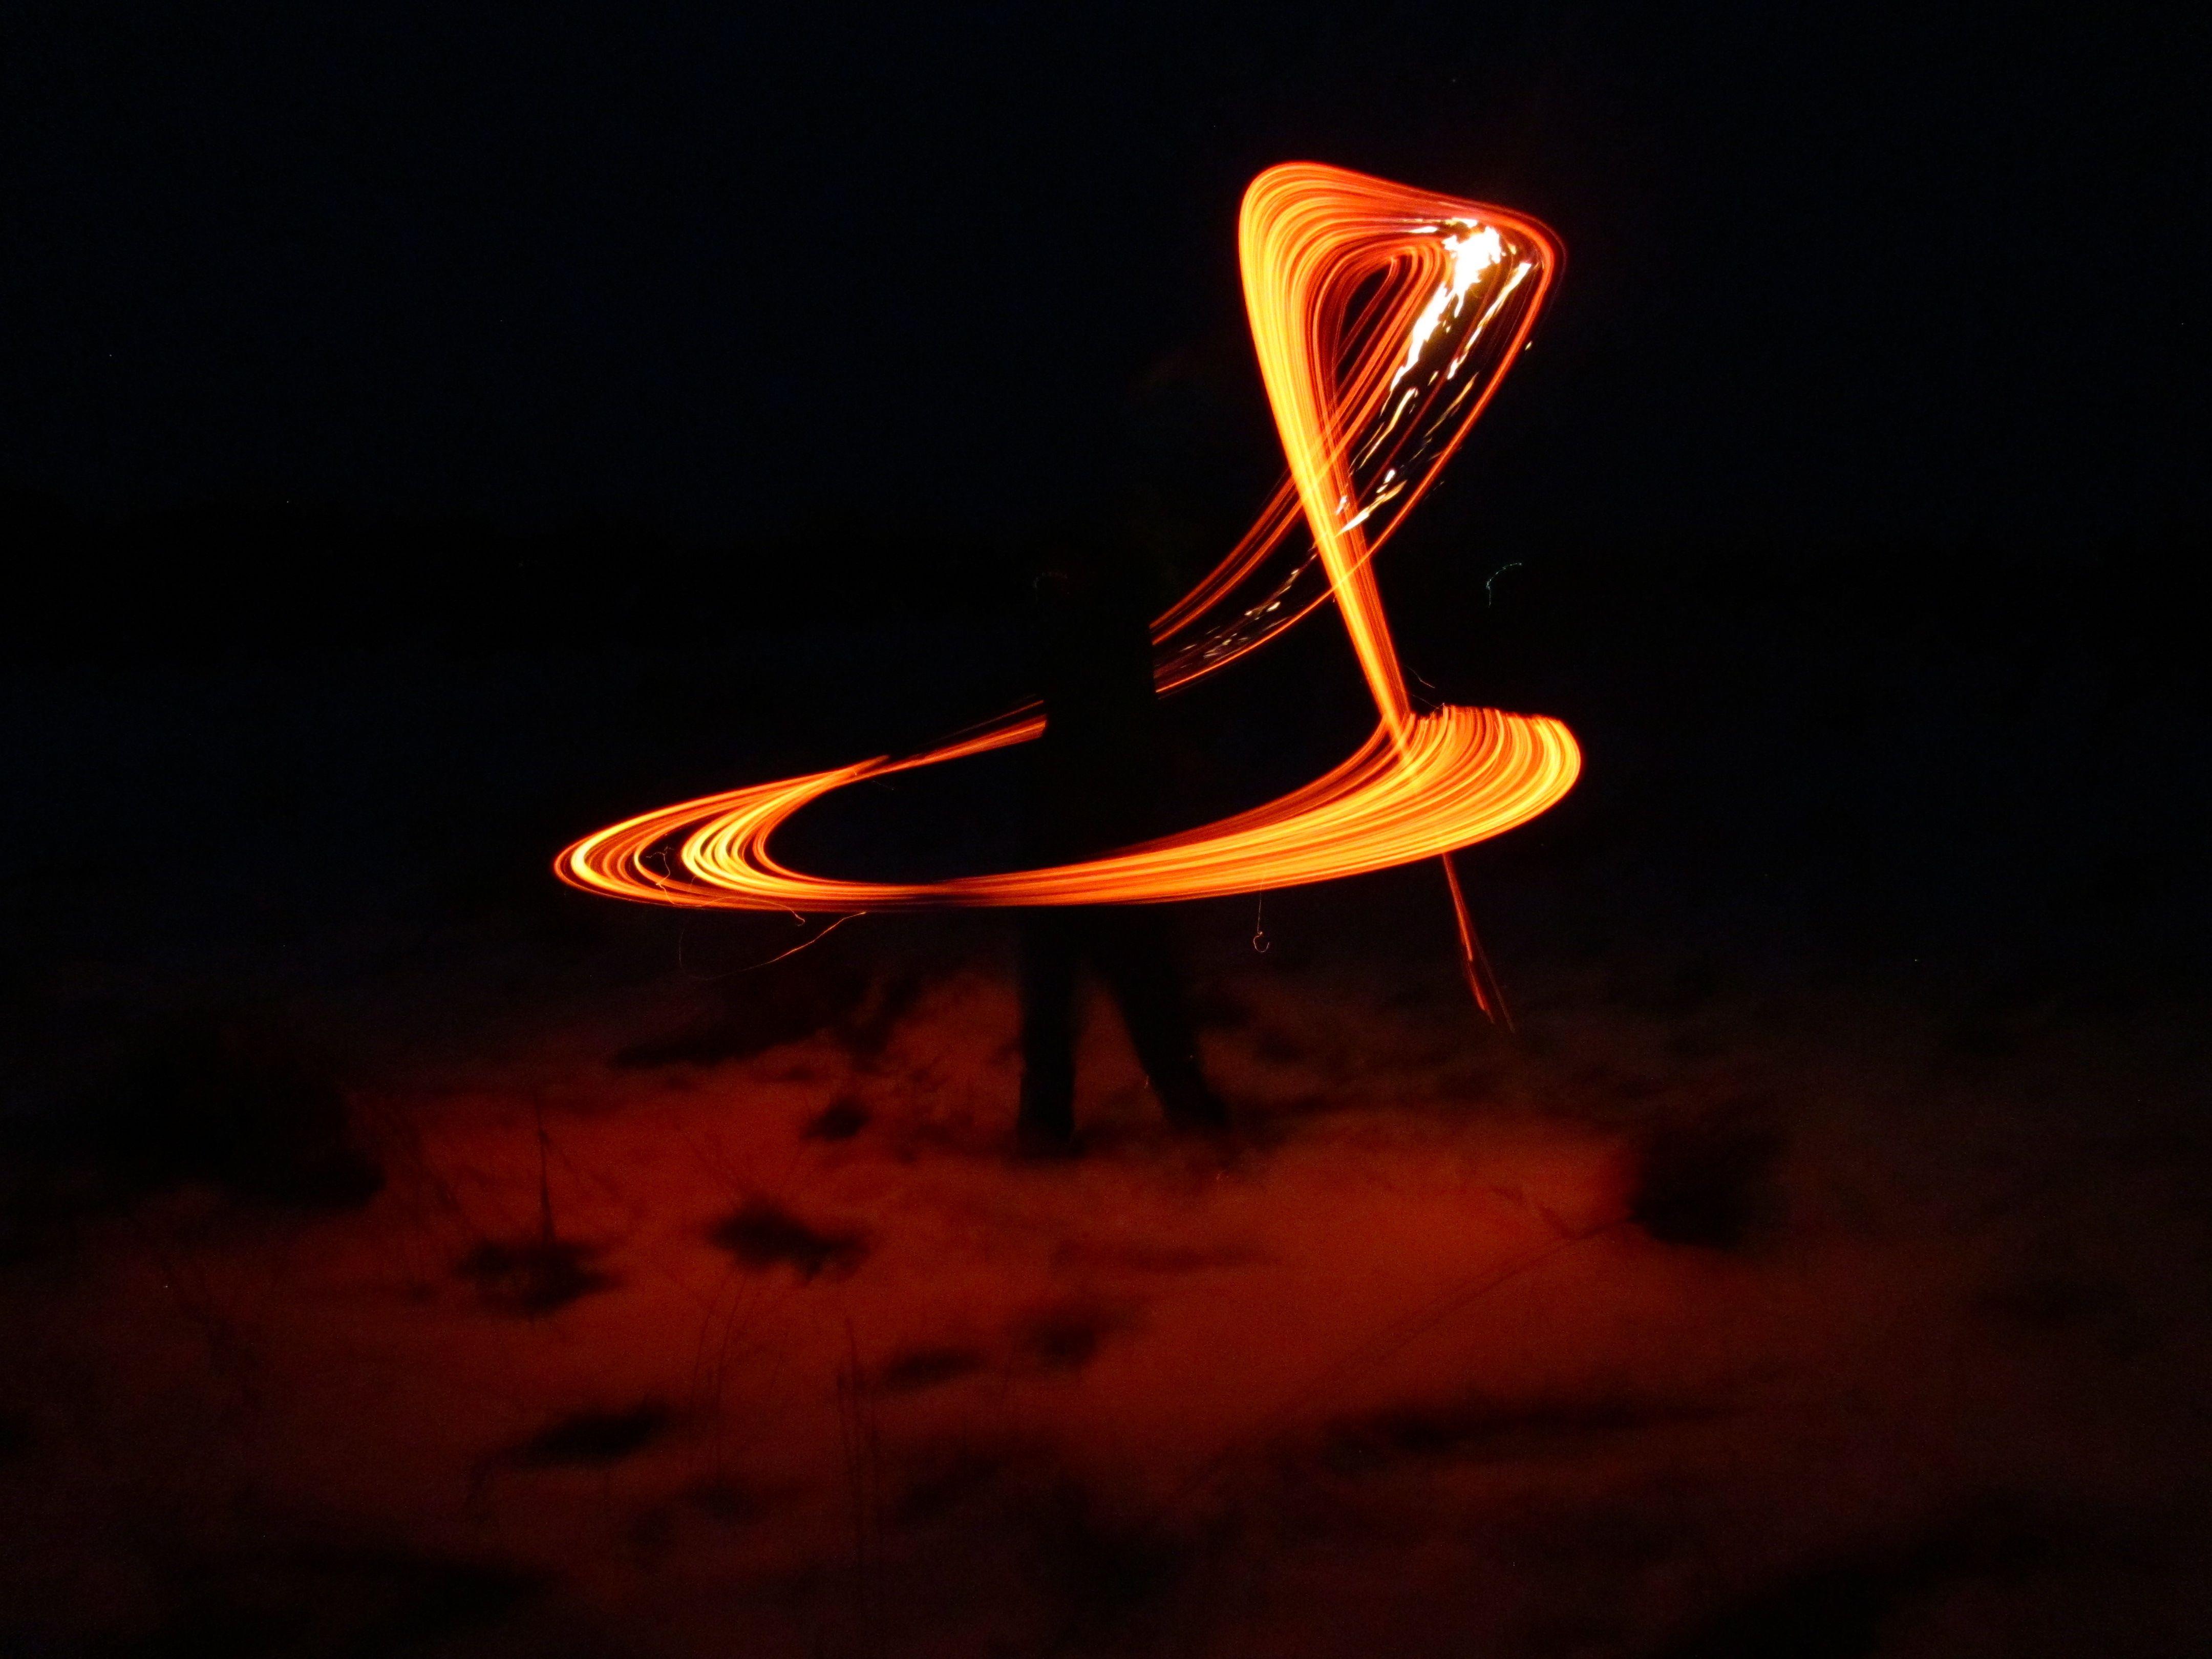 Fire Juggling Creating Coloured Trails With The Flame At Night High-Res  Stock Photo - Getty Images